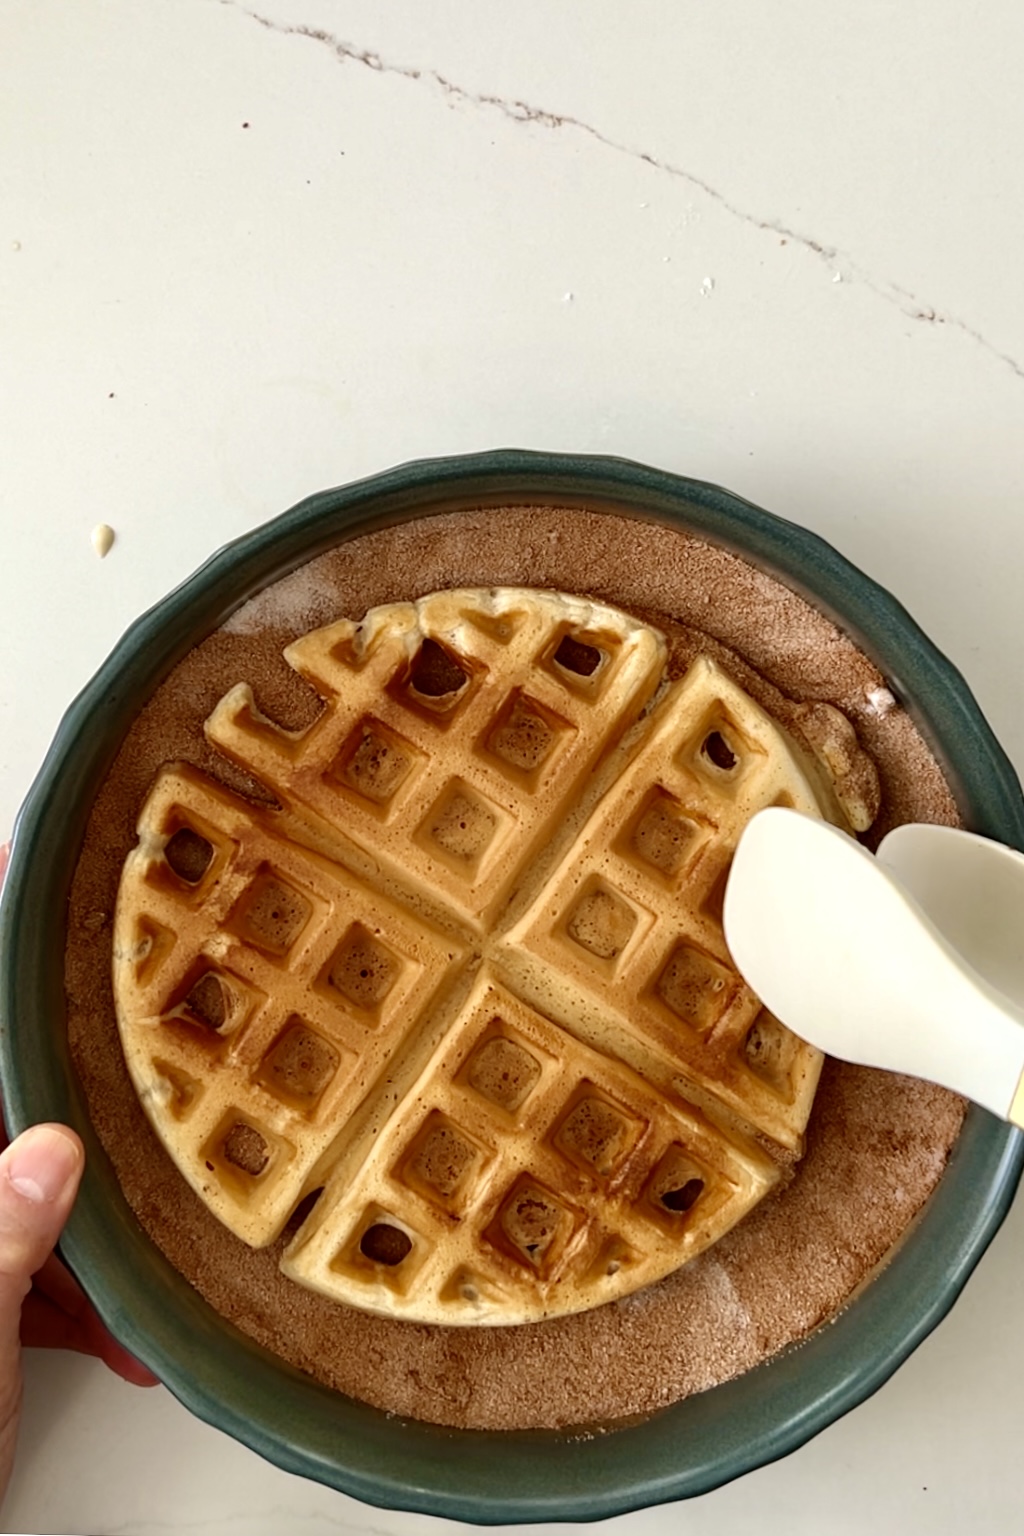 a waffle being coated in a sugar-cinammon mix